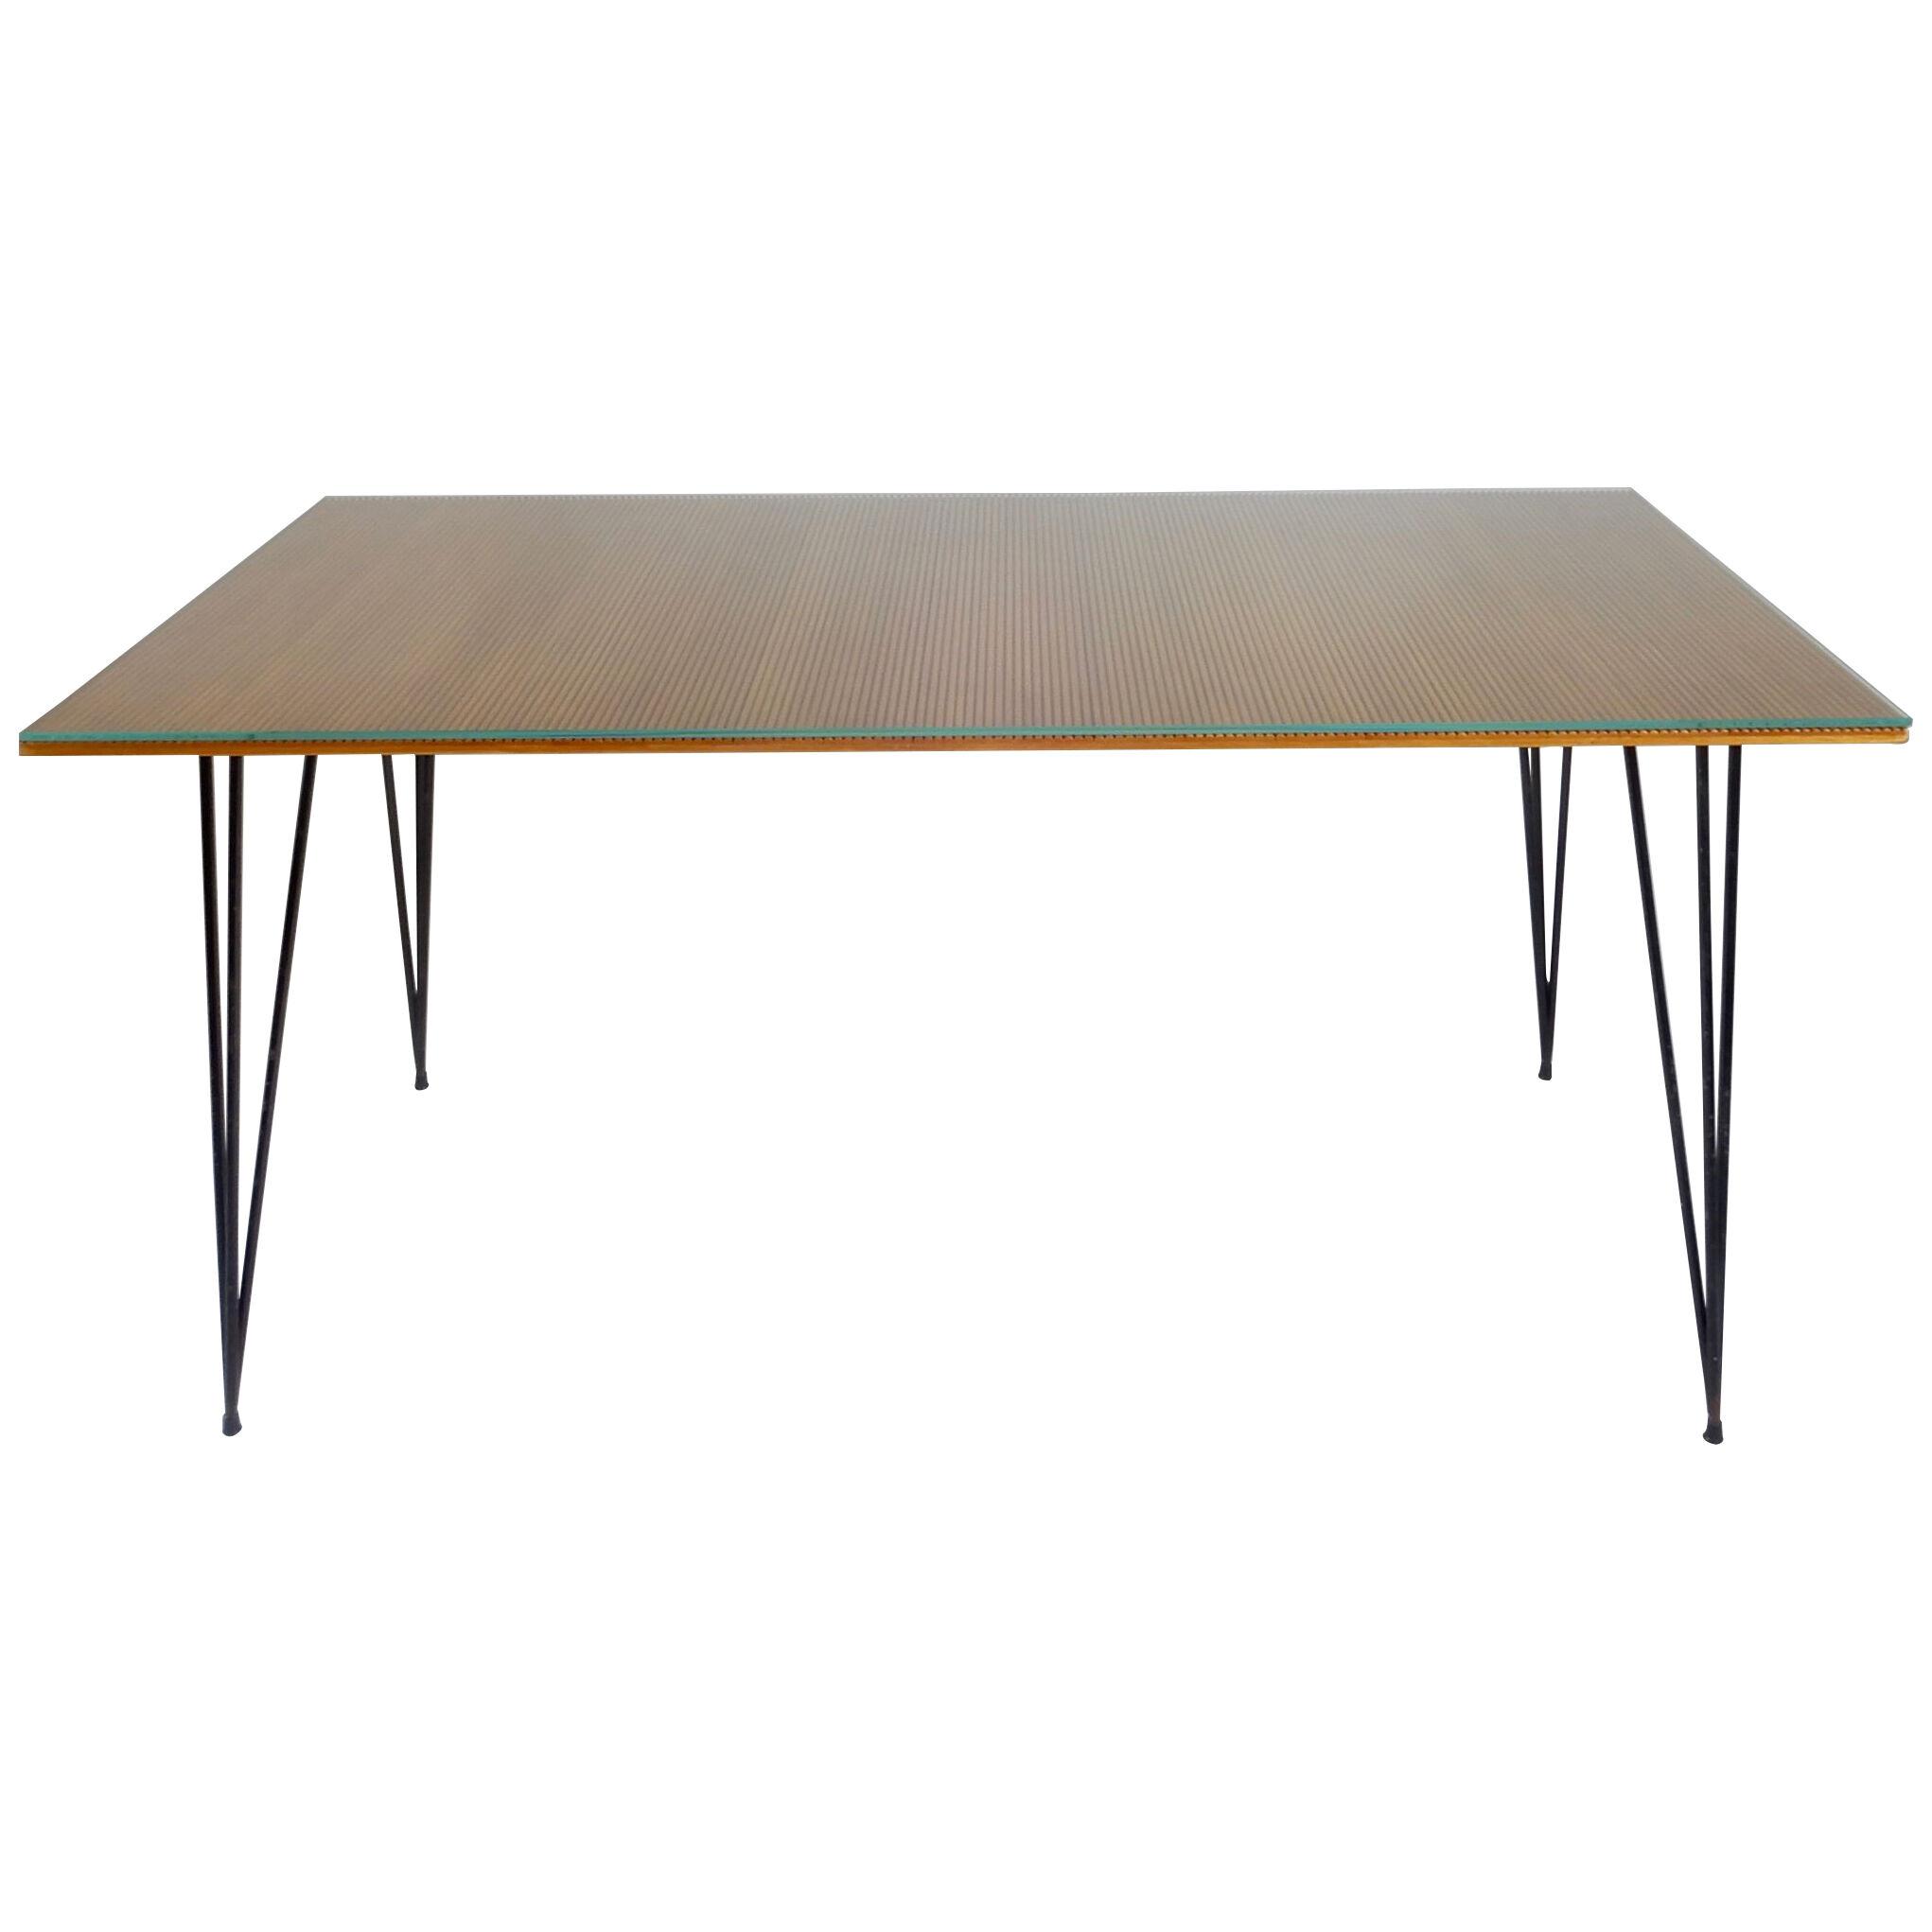 Italian Desk/ Dining Table with Wood Top and Black Metal Legs, 1950s